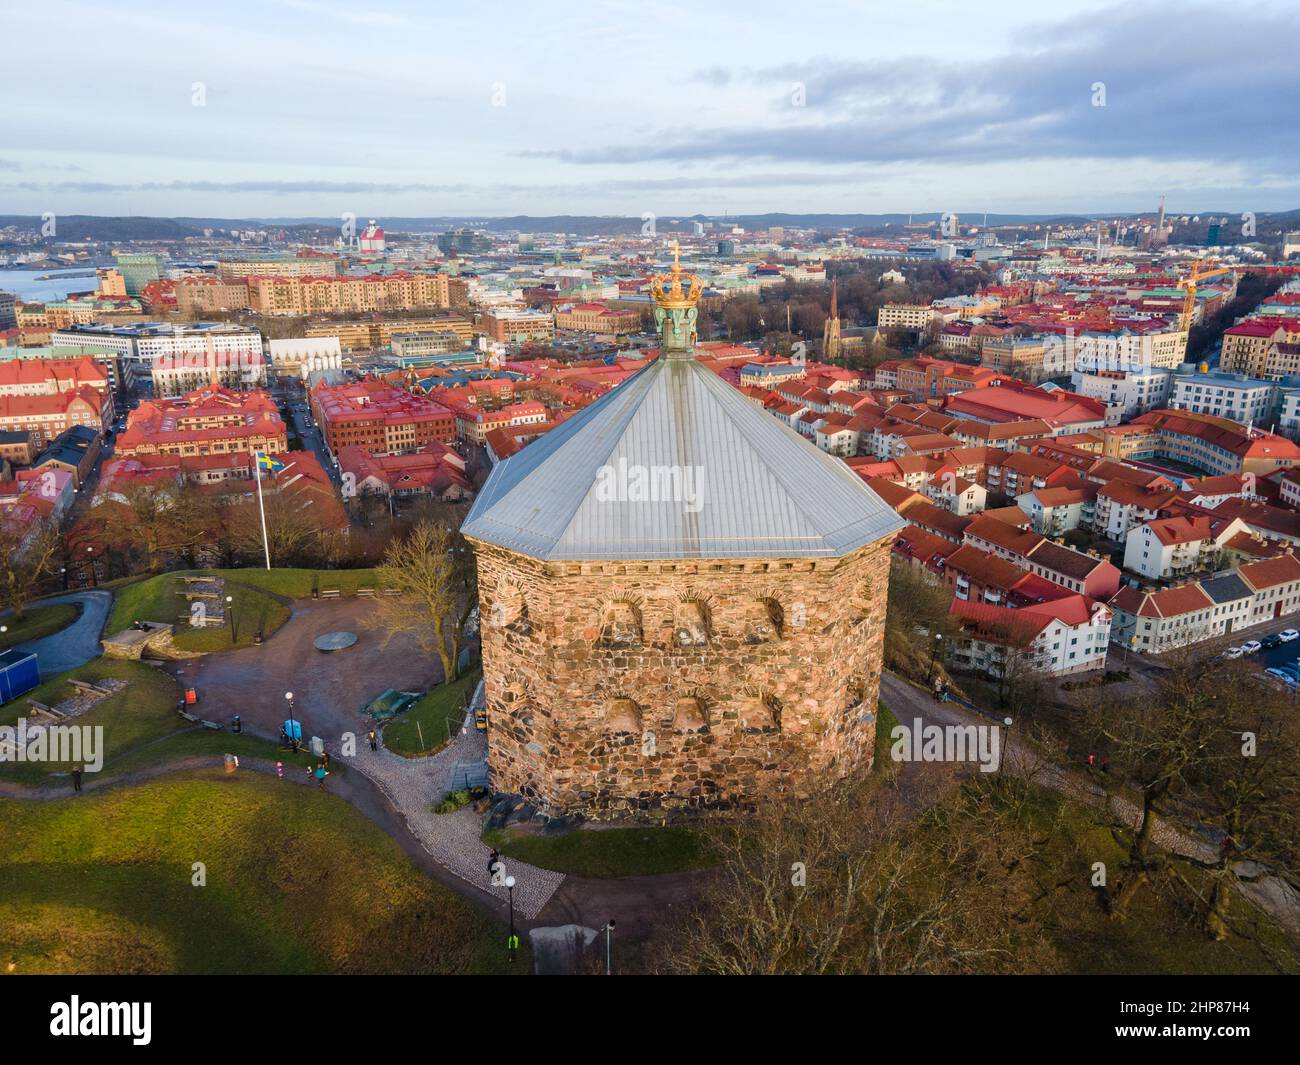 Gothenburg, Sweden: Areal shot of the golden crown on top of the Skansen Kronan, fortress located in Göteborg, Sweden. Stock Photo